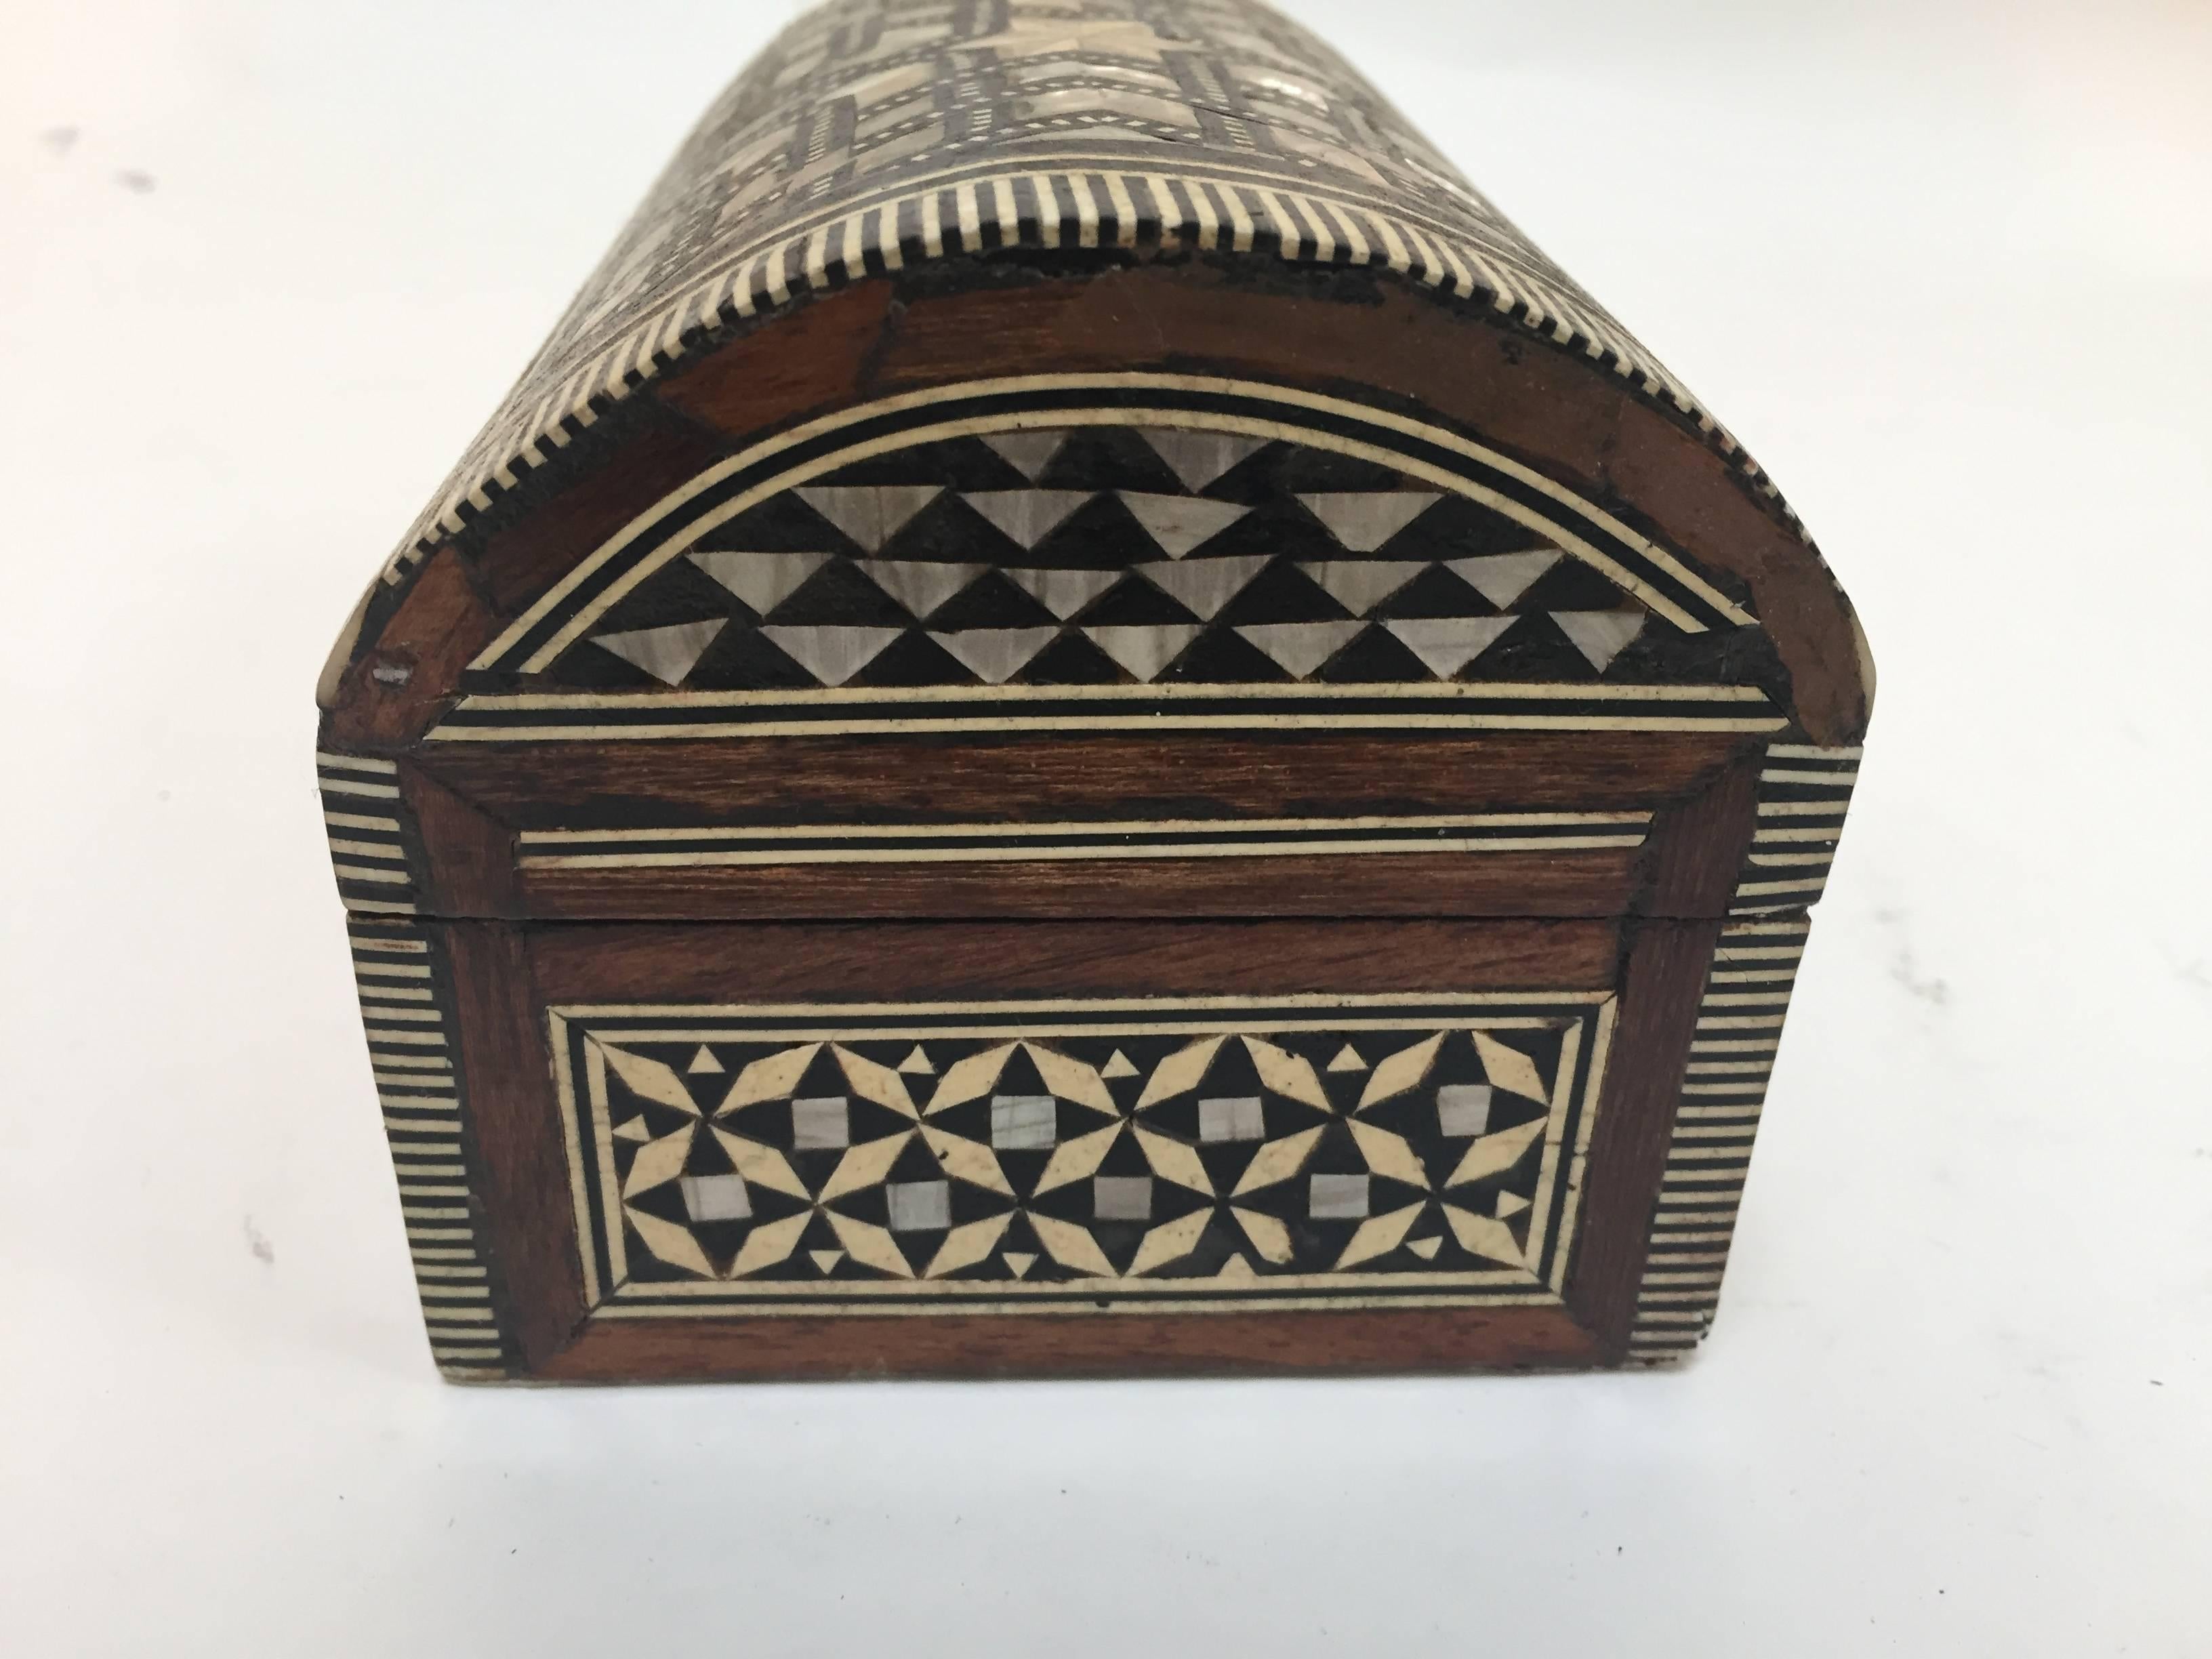 20th Century Middle Eastern Syrian Mother-of-Pearl Inlaid Jewelry Box